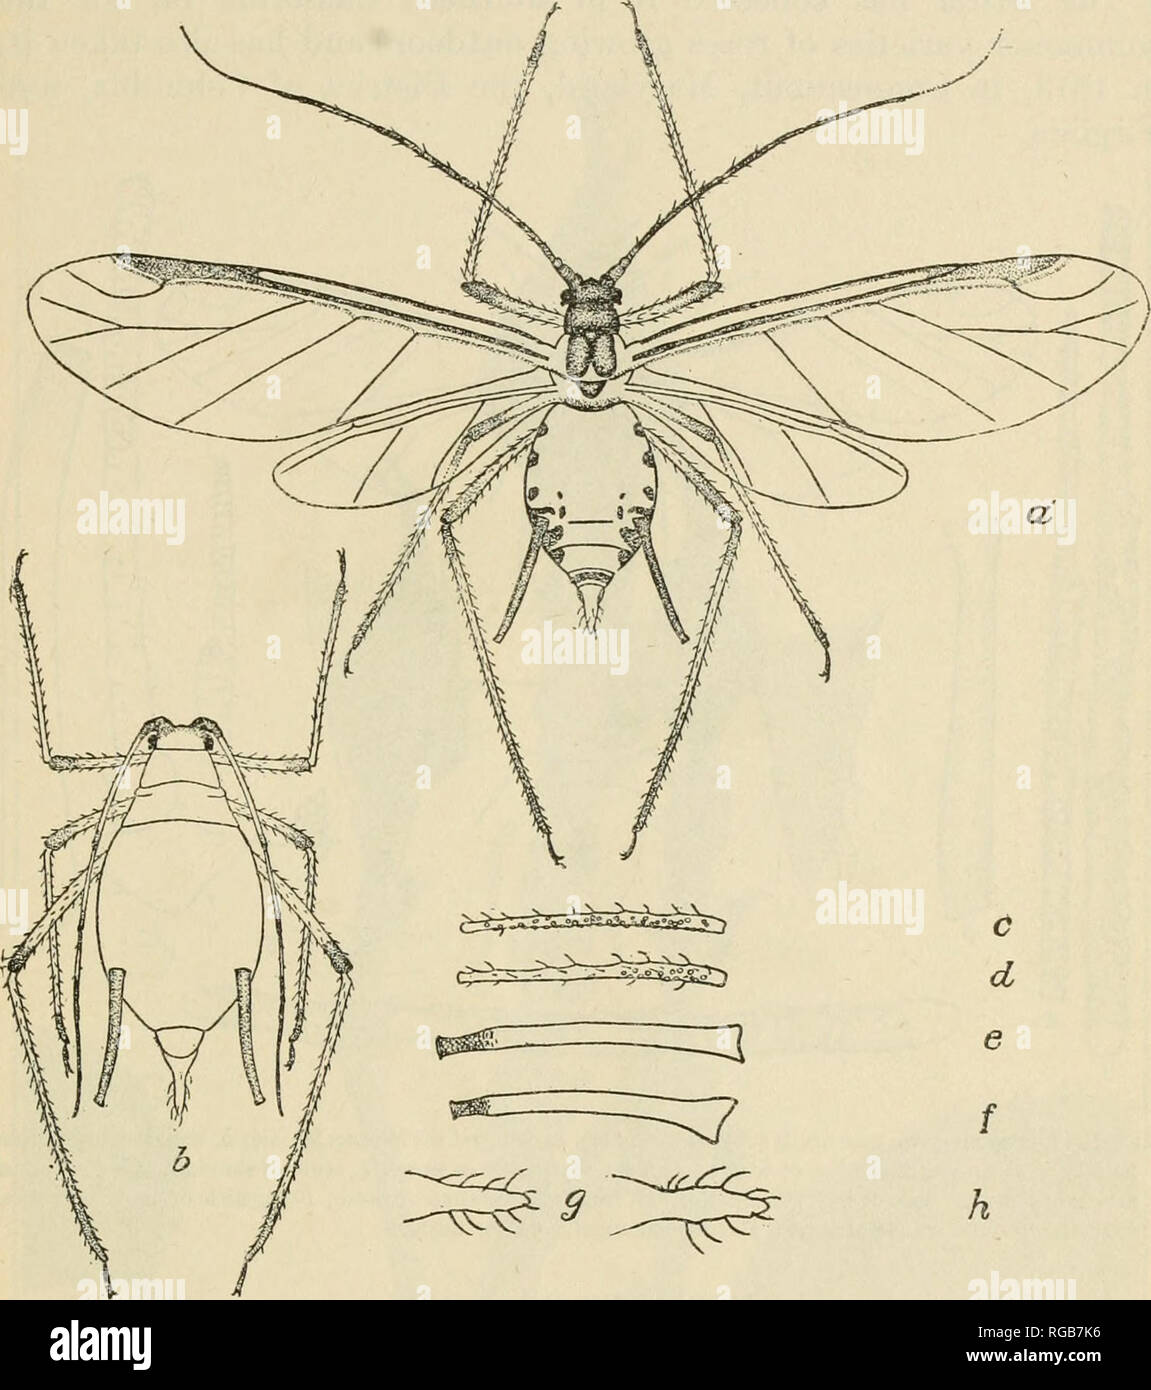 . Bulletin of the U.S. Department of Agriculture. Agriculture. THE ROSE APHIS. 6 eyes are dark red, the cauda is yellowish, and the veins of the wings are light yellow. The legs, antennae, and cornicles are very long and slender, the antennae longer than the body. The length of -the body is about one-twelfth of an inch (2.5 mm.) from the front to the tip of the cauda and the length of wing about one-sixth of an inch (4.2 mm.).. Fig. 1.—The rose aphis (^Macrosiphum rosx): a, Winged viviparoiis female; 6, wingless viviparous female; c, e, g, third antennal article, cornicle, and style, respectiv Stock Photo